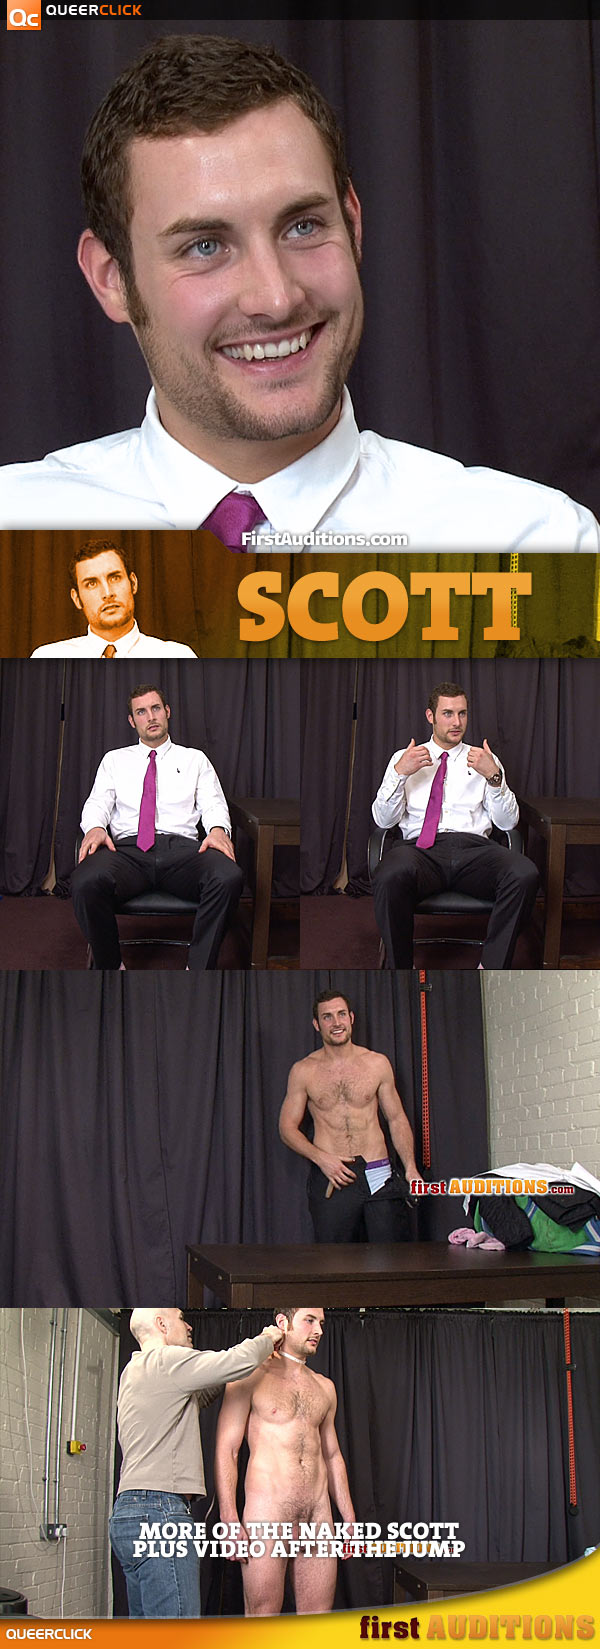 Male First Auditions Gay Porn - First Auditions: Scott - QueerClick